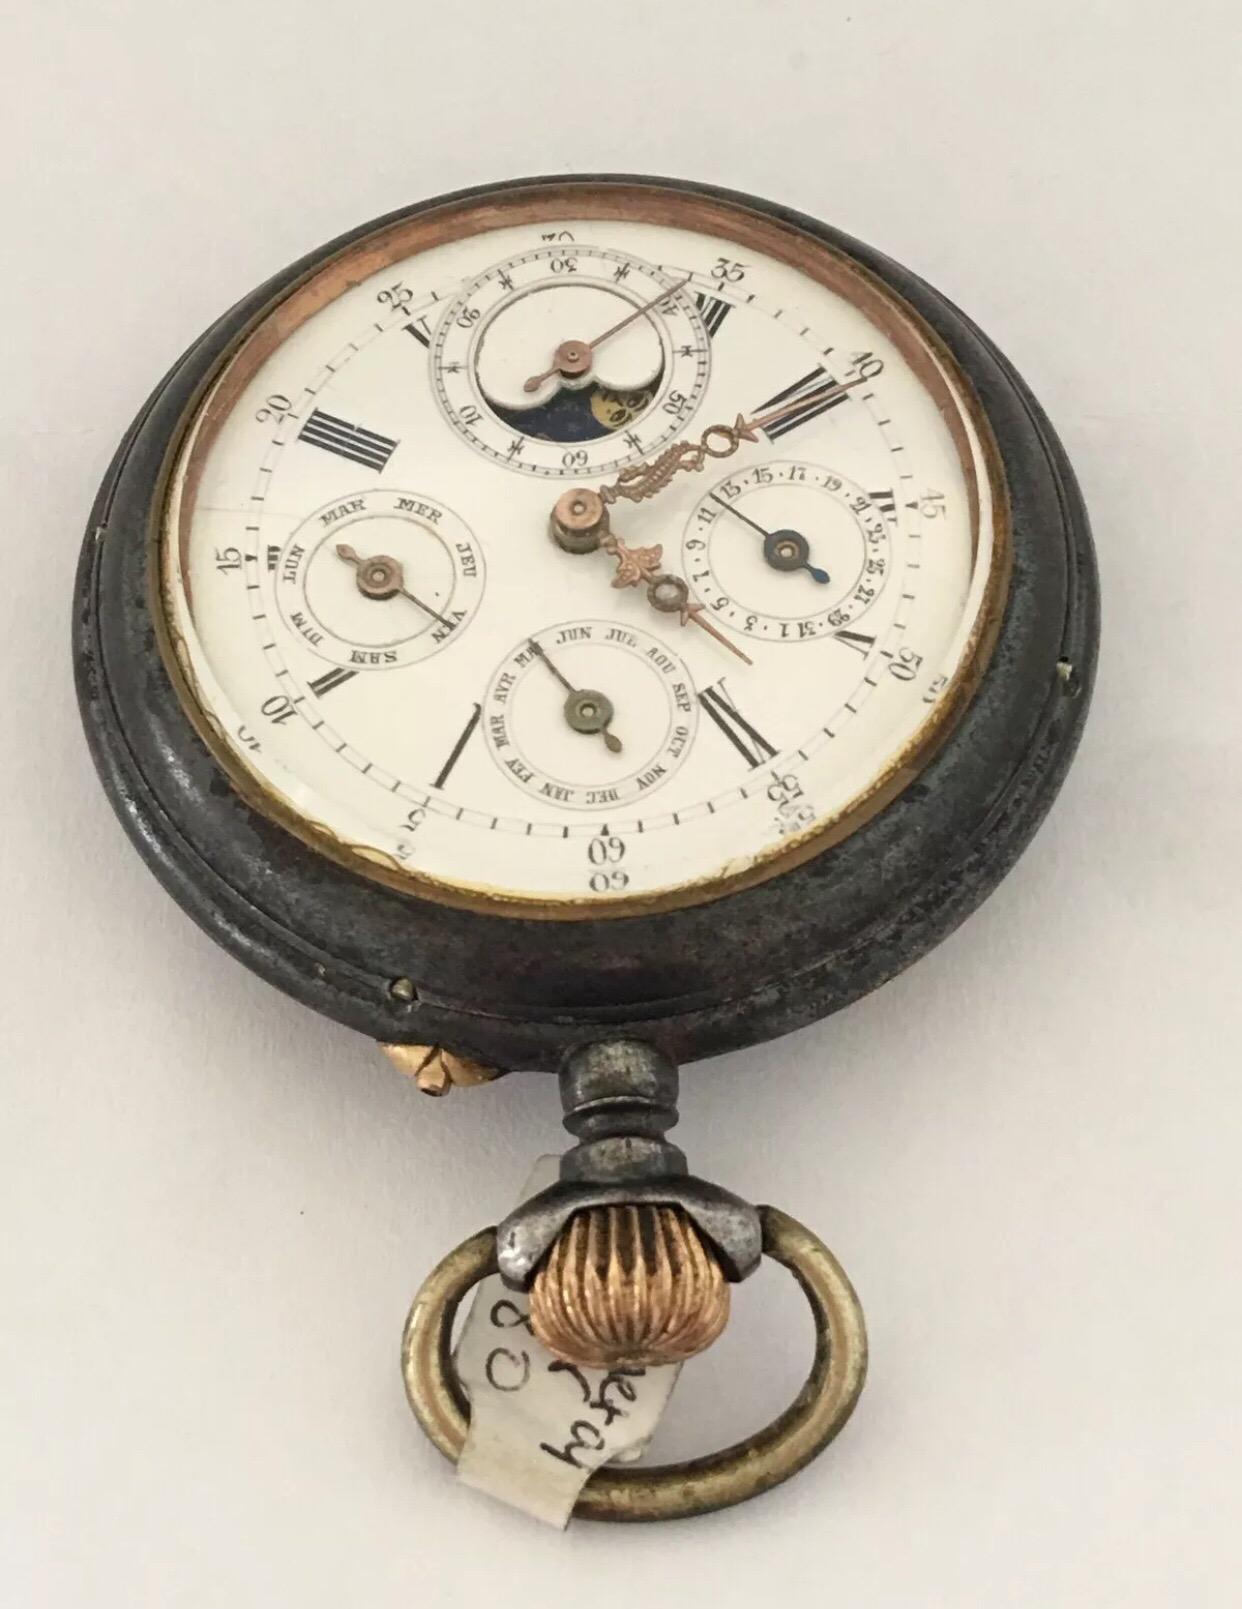 Antique Gunmetal and Silver Moonphase Calendar Pocket Watch 1